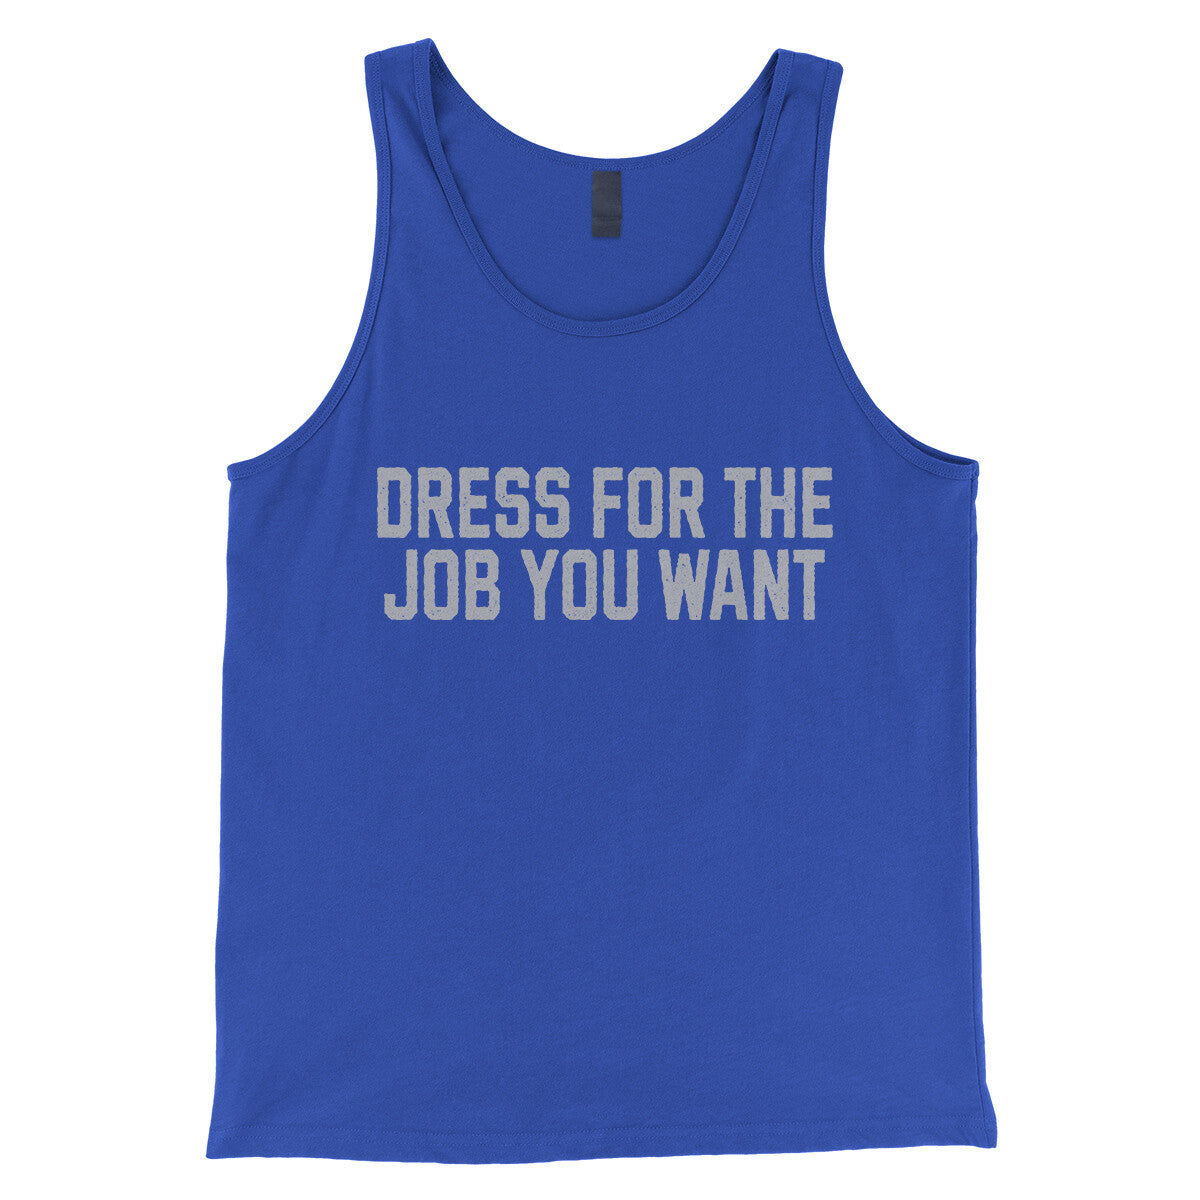 Dress for the Job you Want in True Royal Color